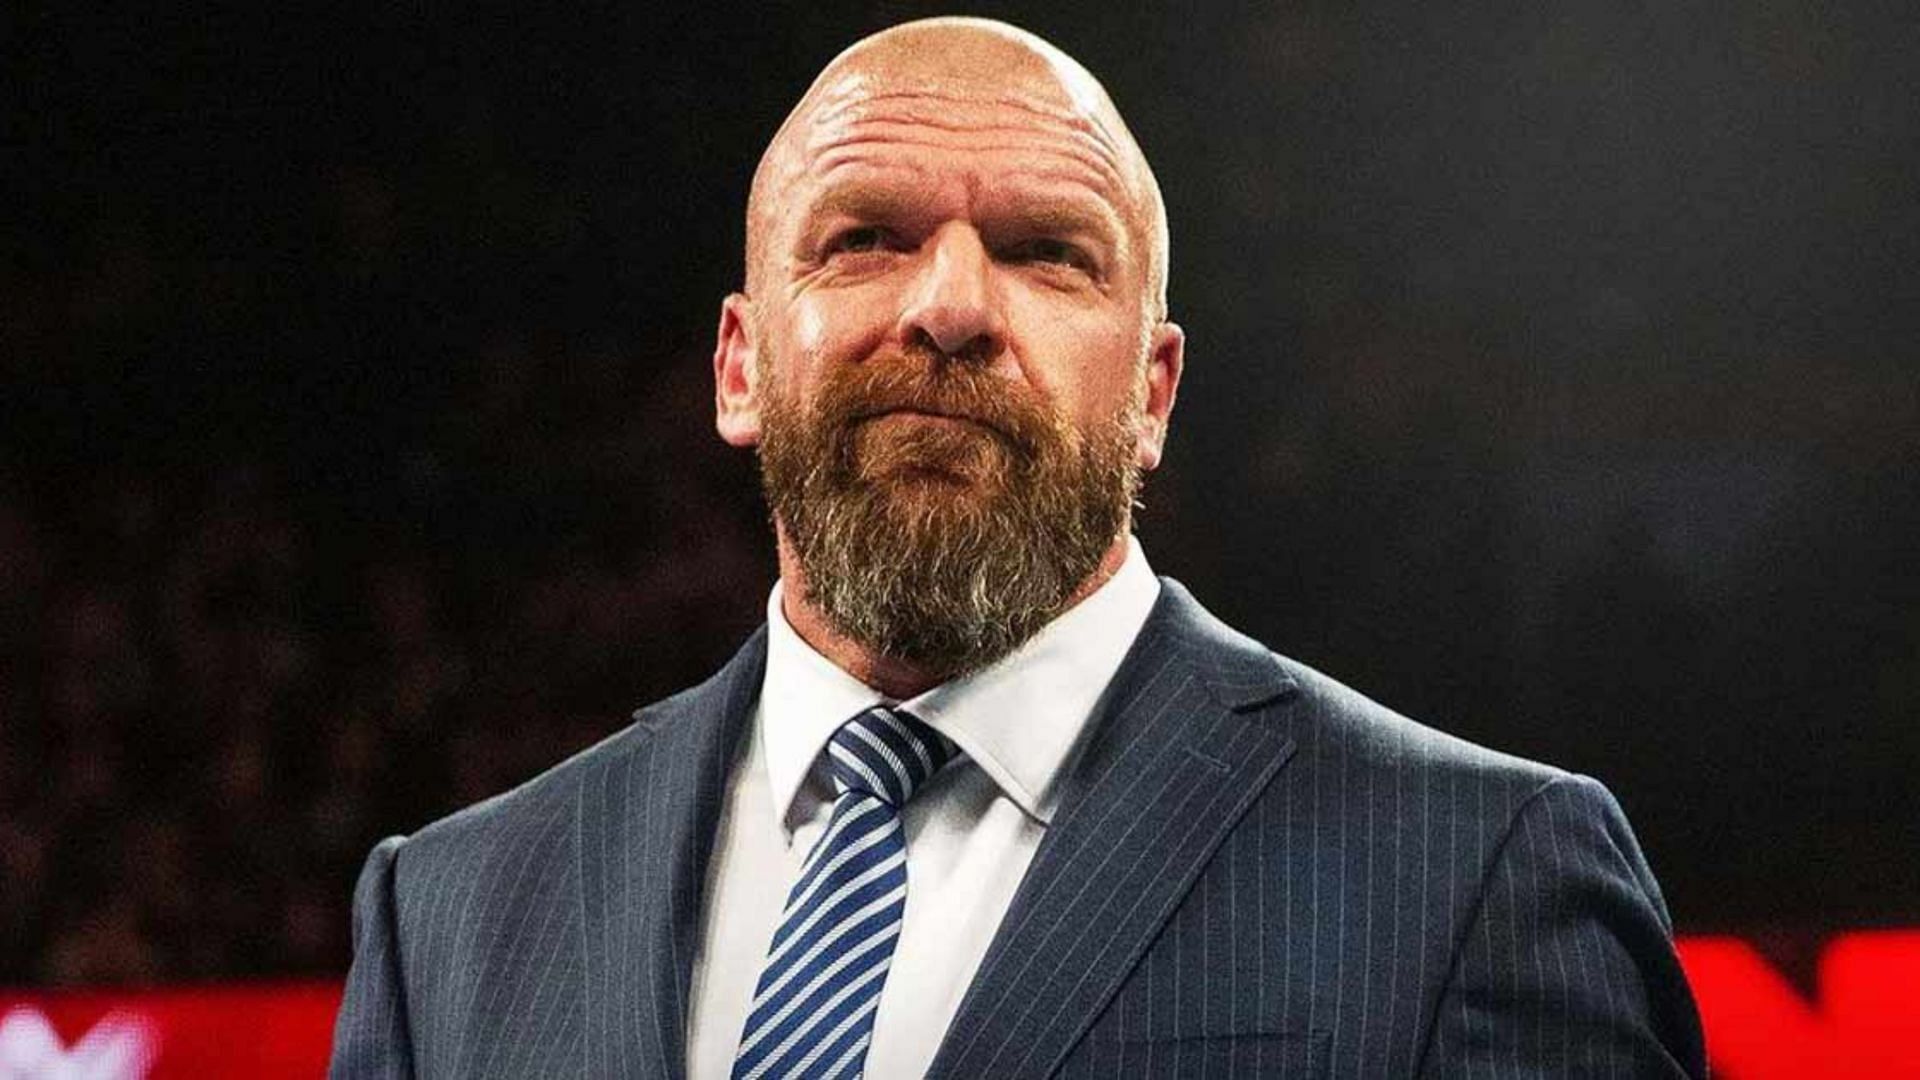 Will WWE Chief Content Officer Triple H contact Rene Dupree?